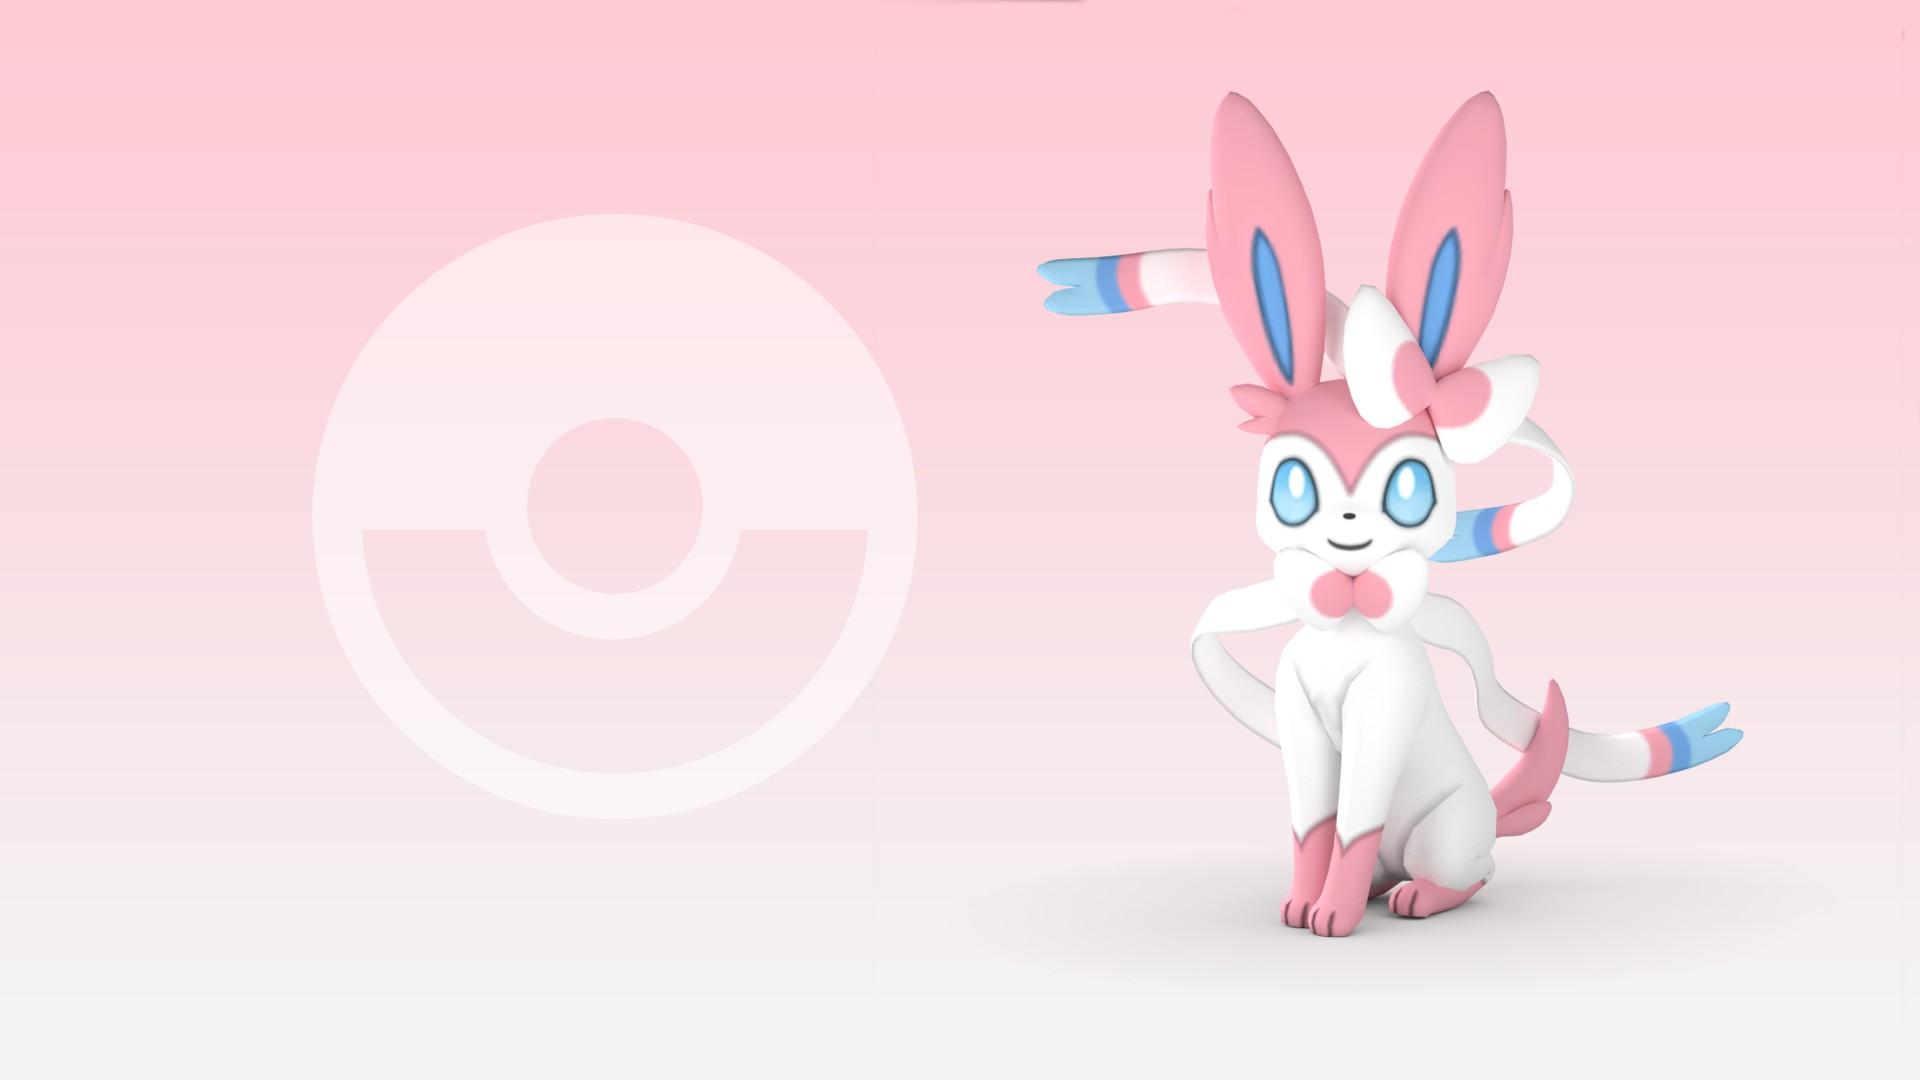 Cute Pokemon Wallpaper Sylveon  Fairy Eeveelution PNG Image  Transparent  PNG Free Download on SeekPNG